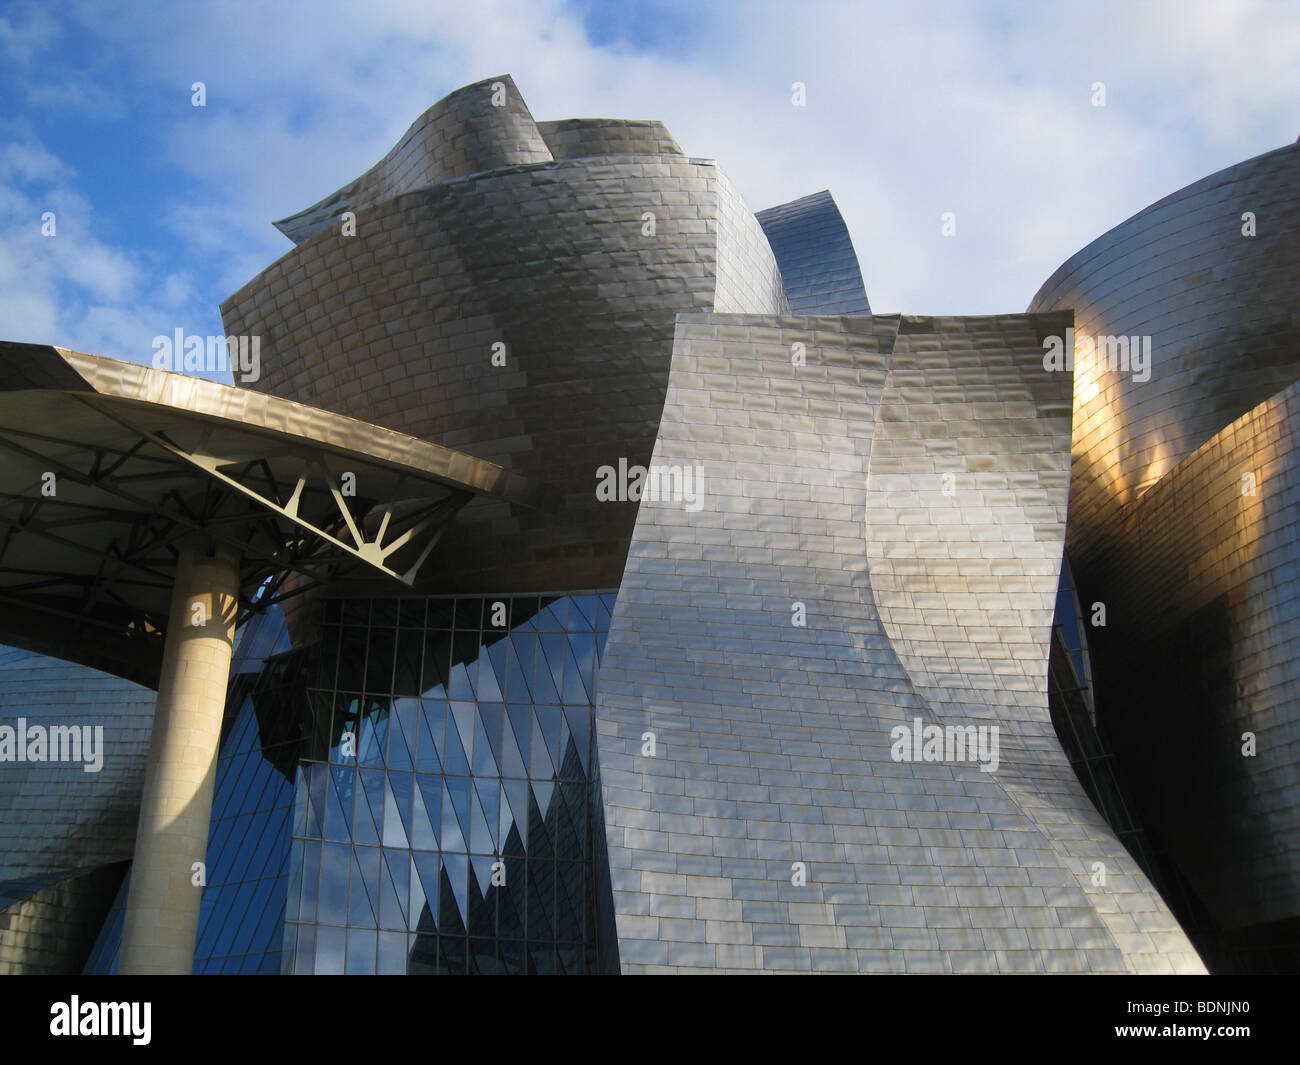 Exterior of the Guggenheim Museum of modern and contemporary art designed by Frank Gehry in Bilbao, Basque country northern Spain Stock Photo